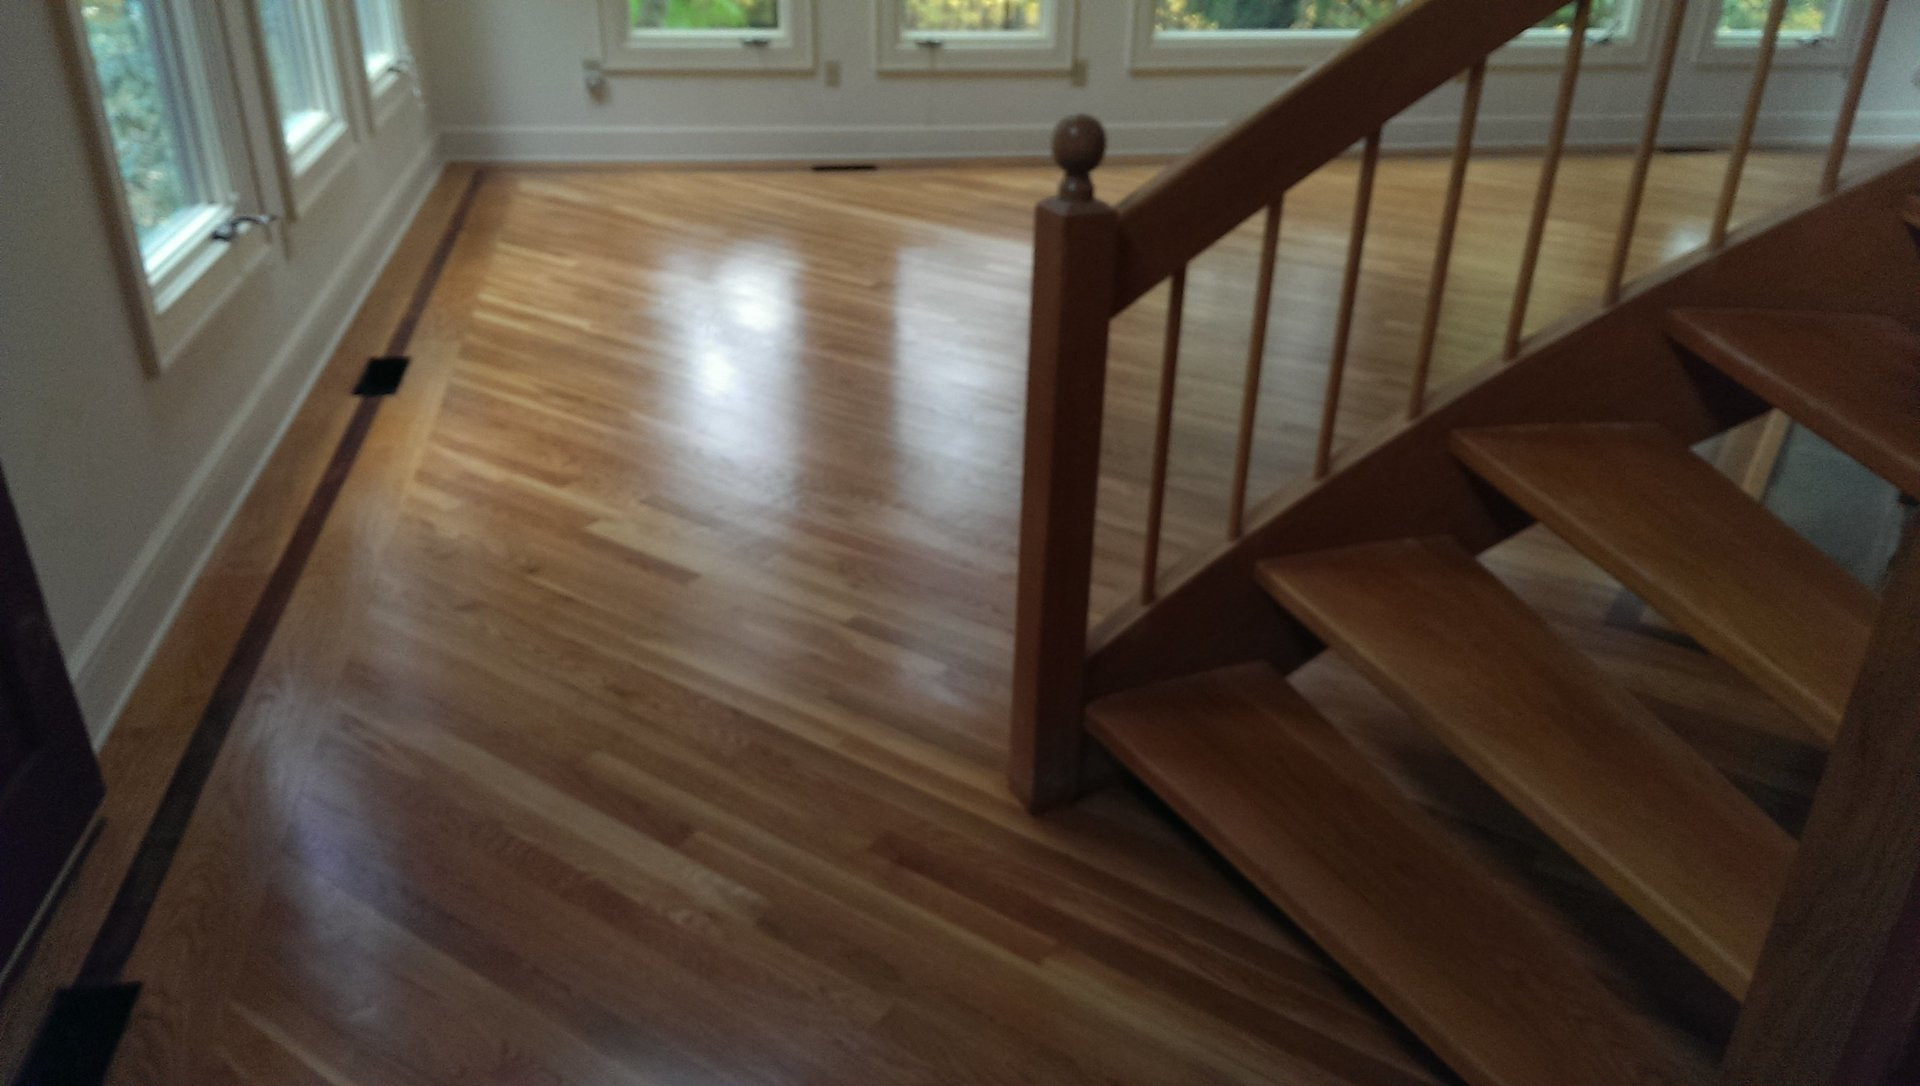 13 Nice Hardwood Floors Fairfield Ct 2024 free download hardwood floors fairfield ct of american floor service staircase gallery fairfield ct in check out our wood staircase projects